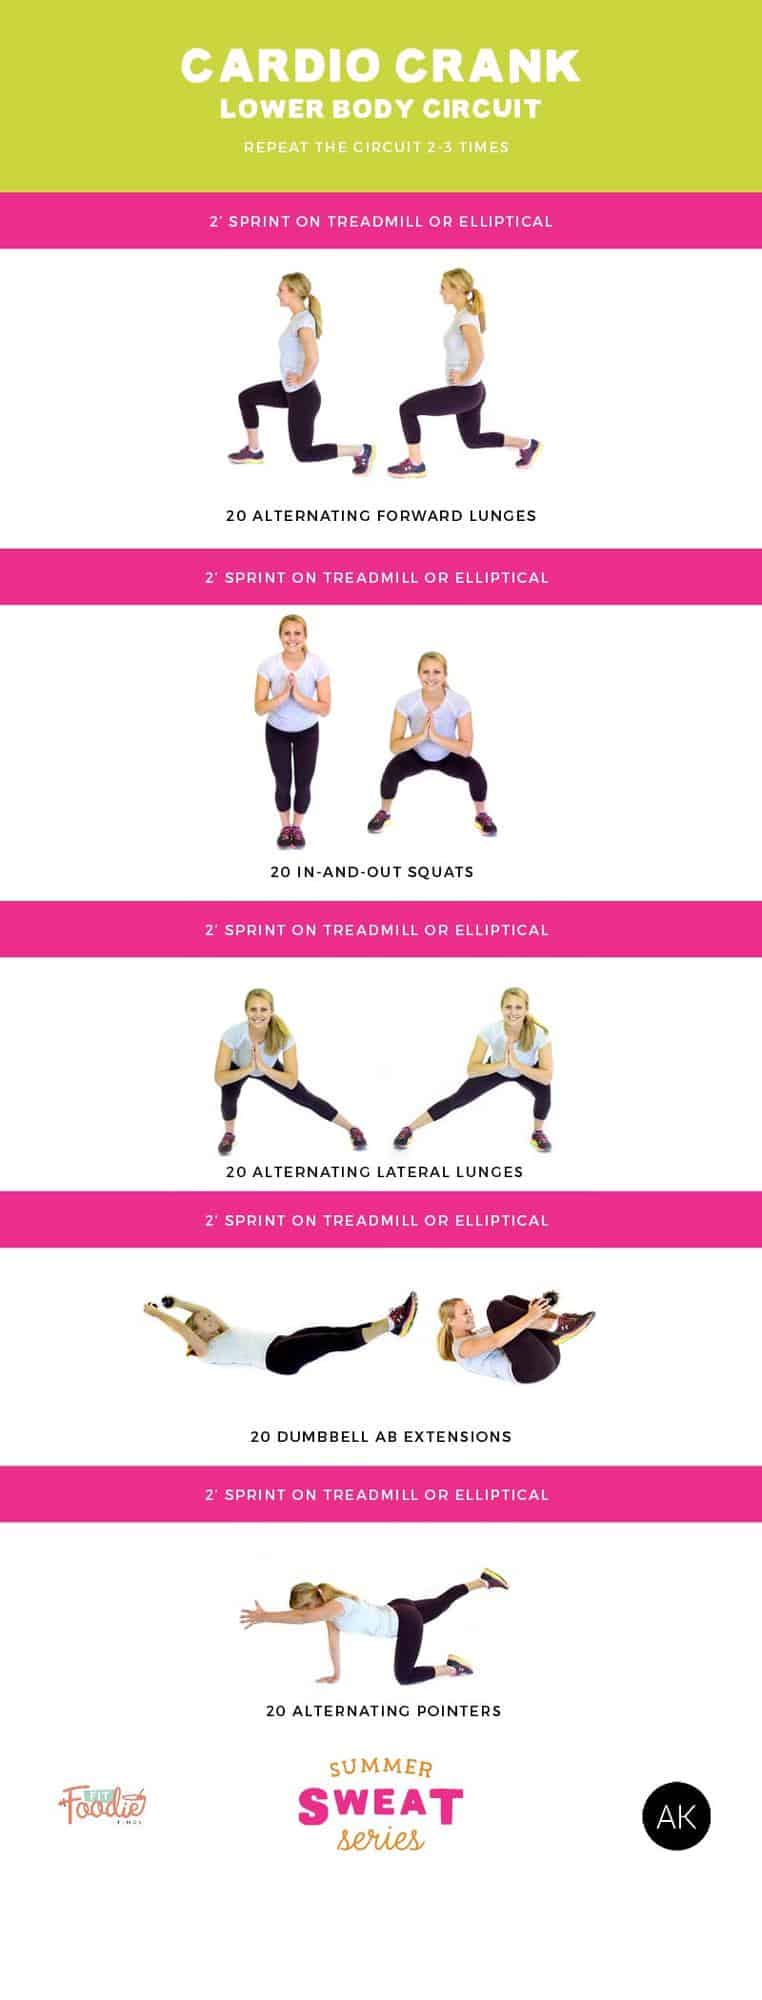 Torch calories with this Cardio Crank Lower Body Circuit Workout as part of the #SummerSWEATSeries